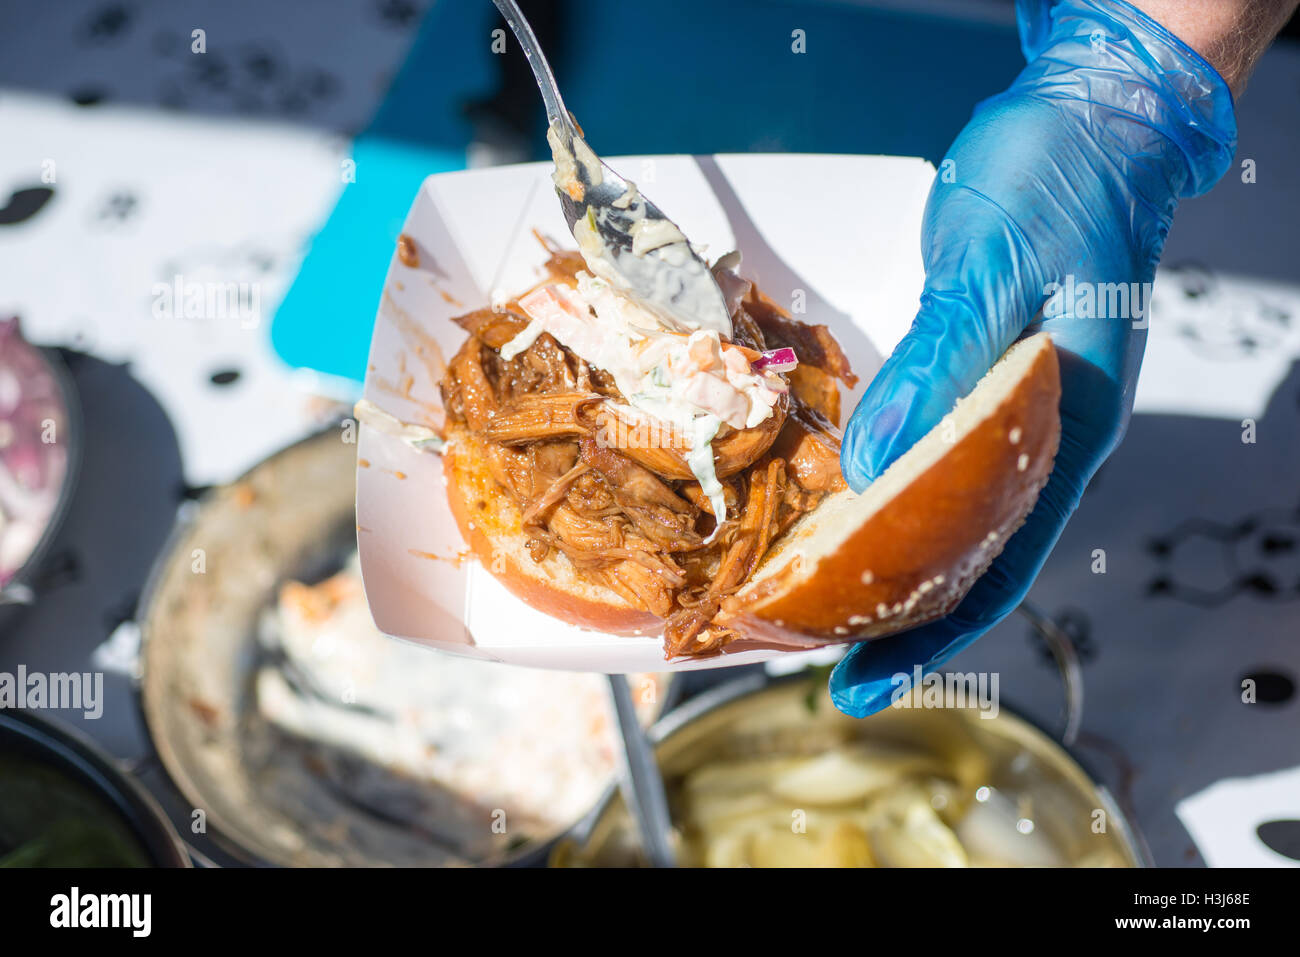 white bread bun in a white food tray being topped with toppings such as pulled pork and coleslaw with gloved hands holding tongs Stock Photo